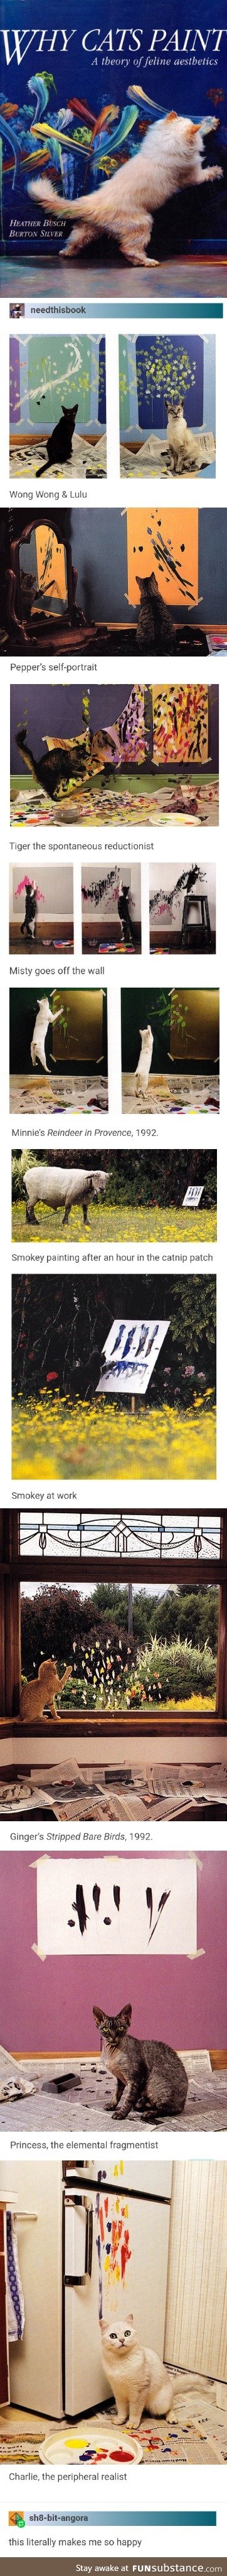 Why Cats Paint